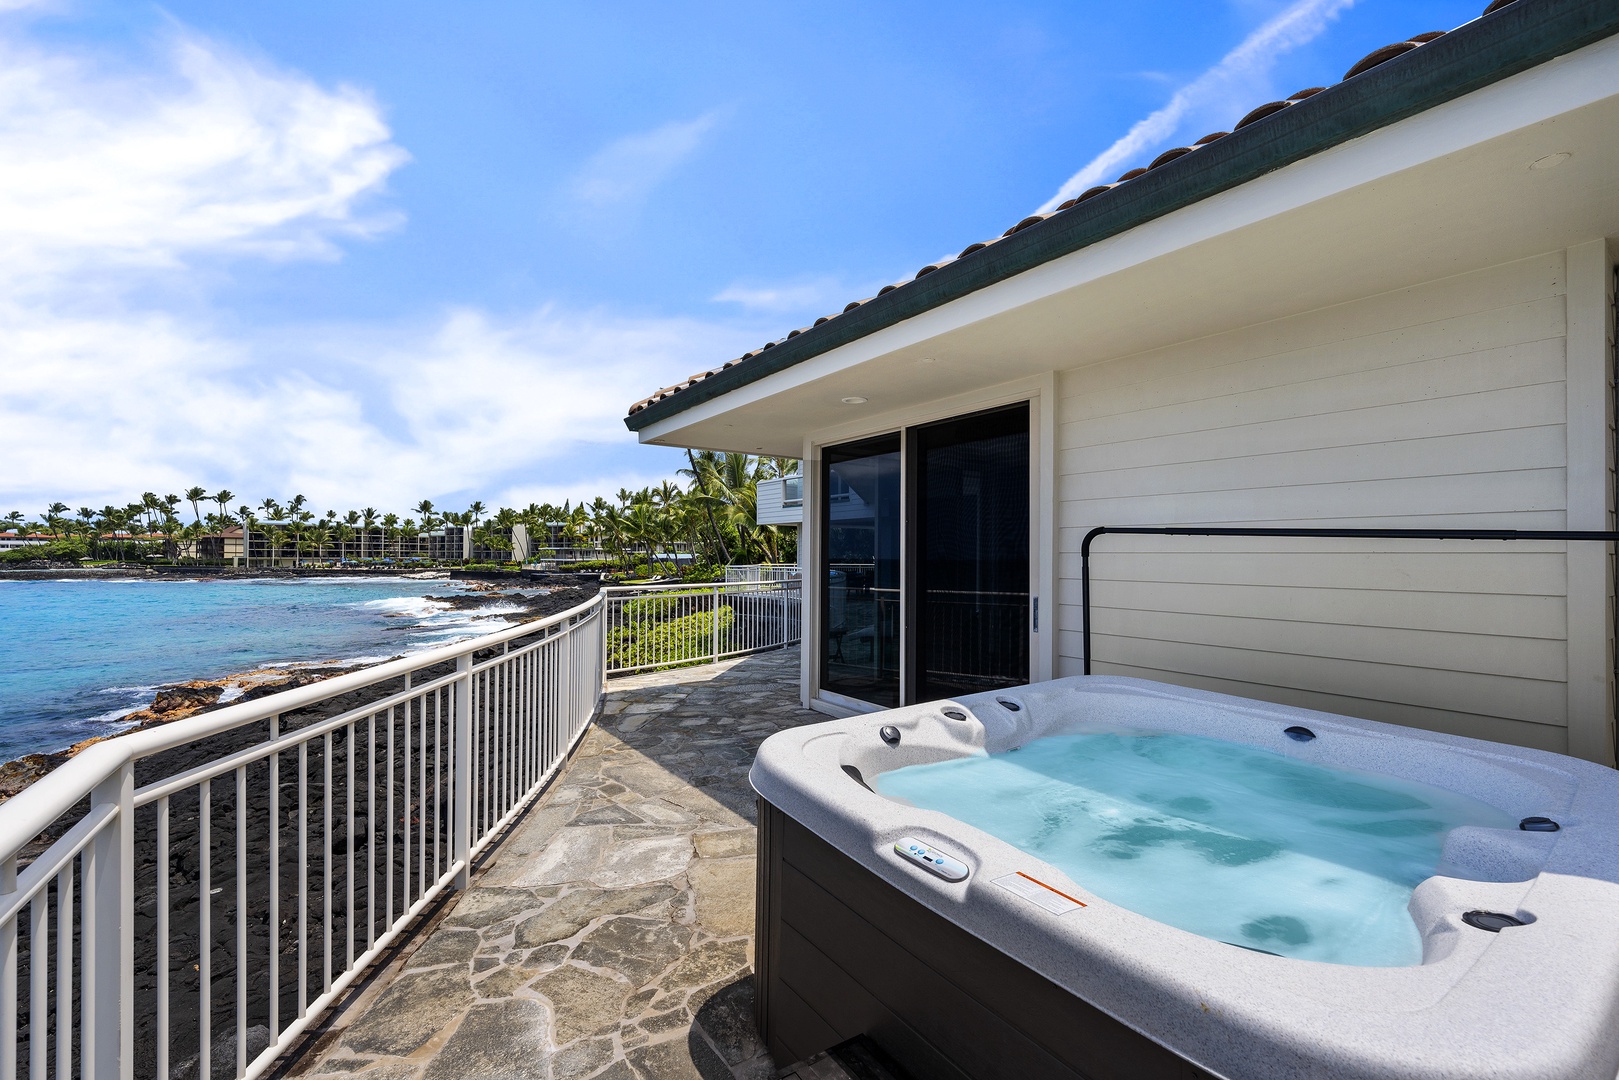 Kailua Kona Vacation Rentals, Ali'i Point #12 - Hot tub located right outside of the downstairs bedroom